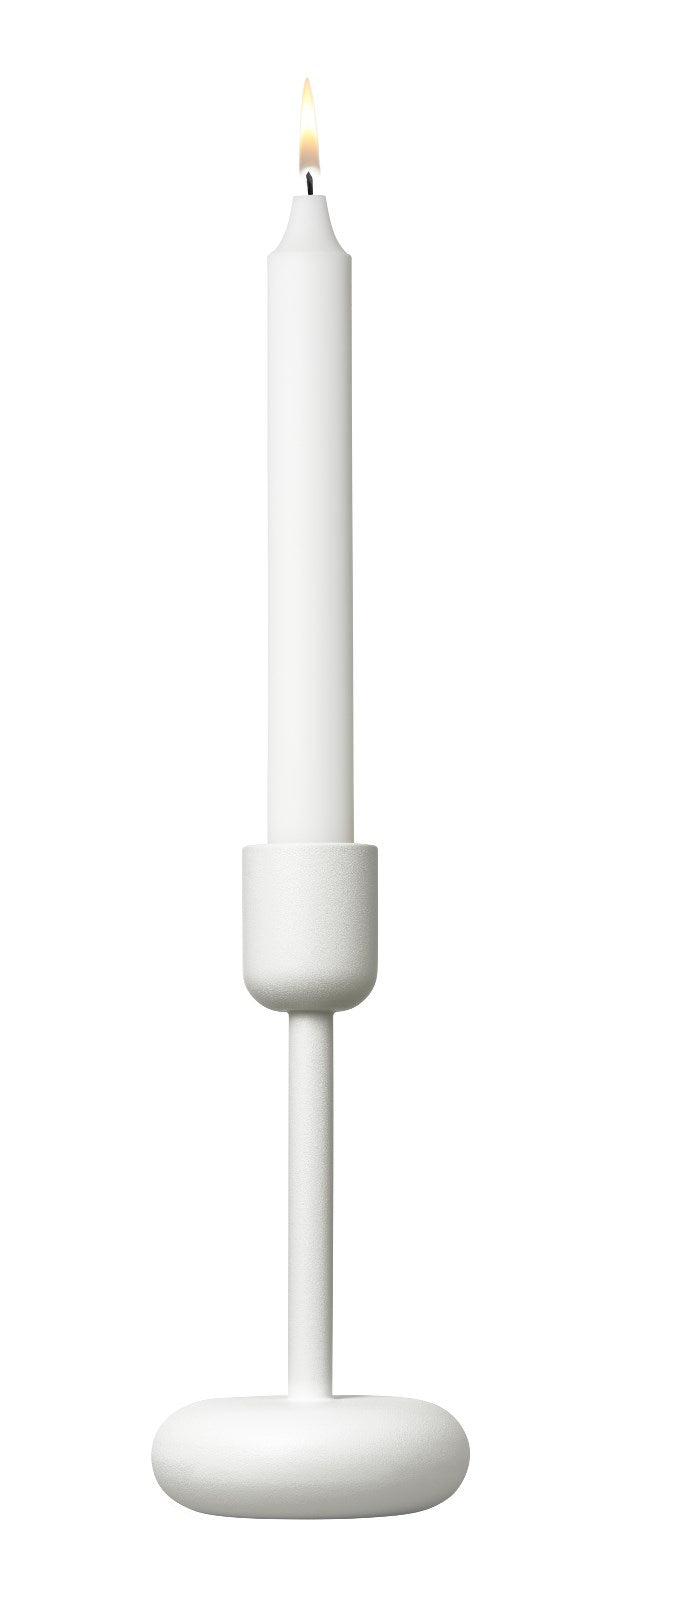 media image for Nappula Candleholder in Various Sizes & Colors design by Matti Klenell for Iittala 270